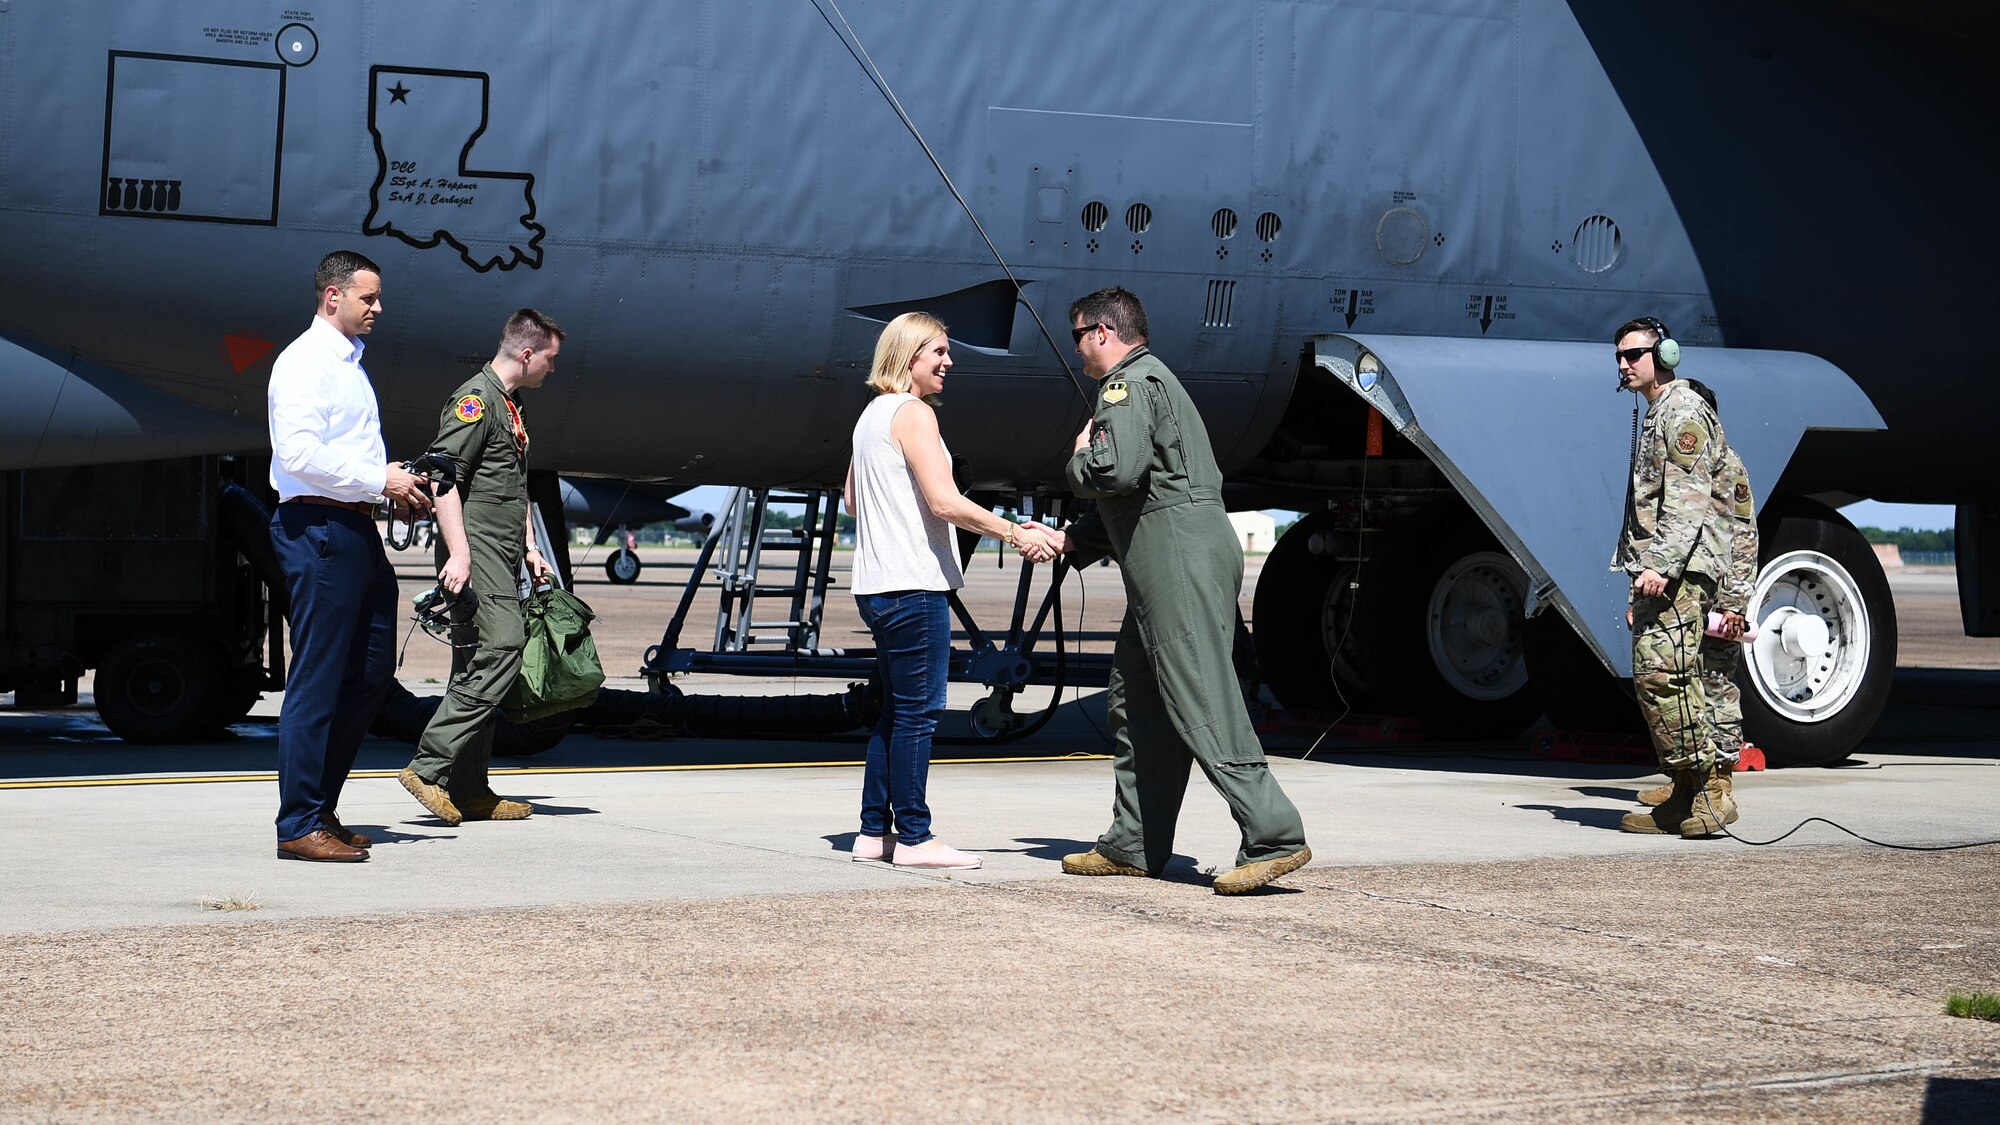 Lauren Barrett Knausenberger, Air Force chief information officer, meets with Airmen during an official visit to Barksdale Air Force Base, Louisiana, June 15, 2021. As the Air Force CIO, Knausenberger leads two directorates and supports 20,000 cyber operations and support personnel around the globe. (U.S. Air Force photo by Senior Airman Jacob B. Wrightsman)